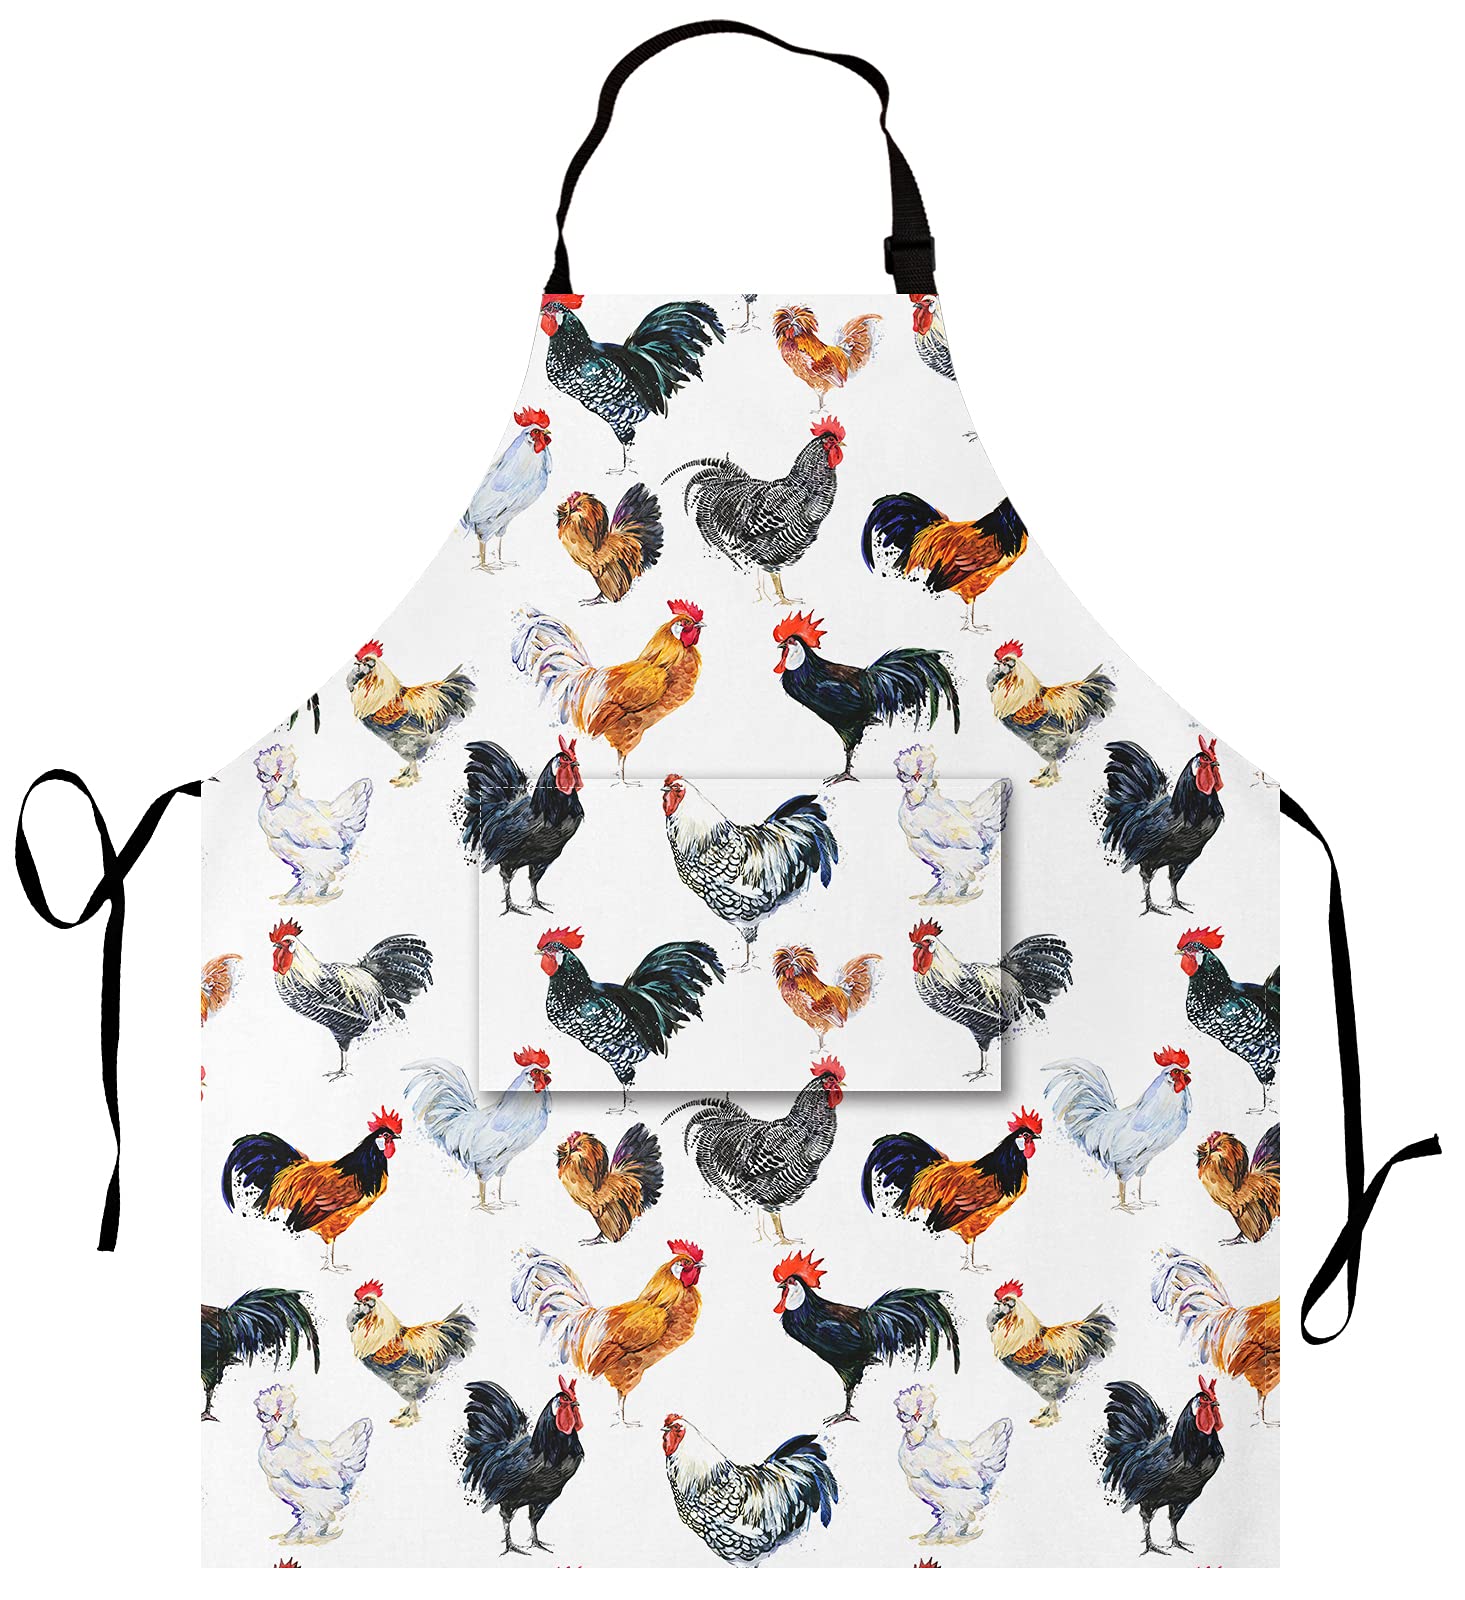 EEIVEUN Kitchen Apron Rooster Cockerel Chicken Farm Pattern Chef Bib Aprons for Women Men with Long Ties Waterdrop Oil Resistant Hostess Apron for Holidays Grill Cooking Baking BBQ